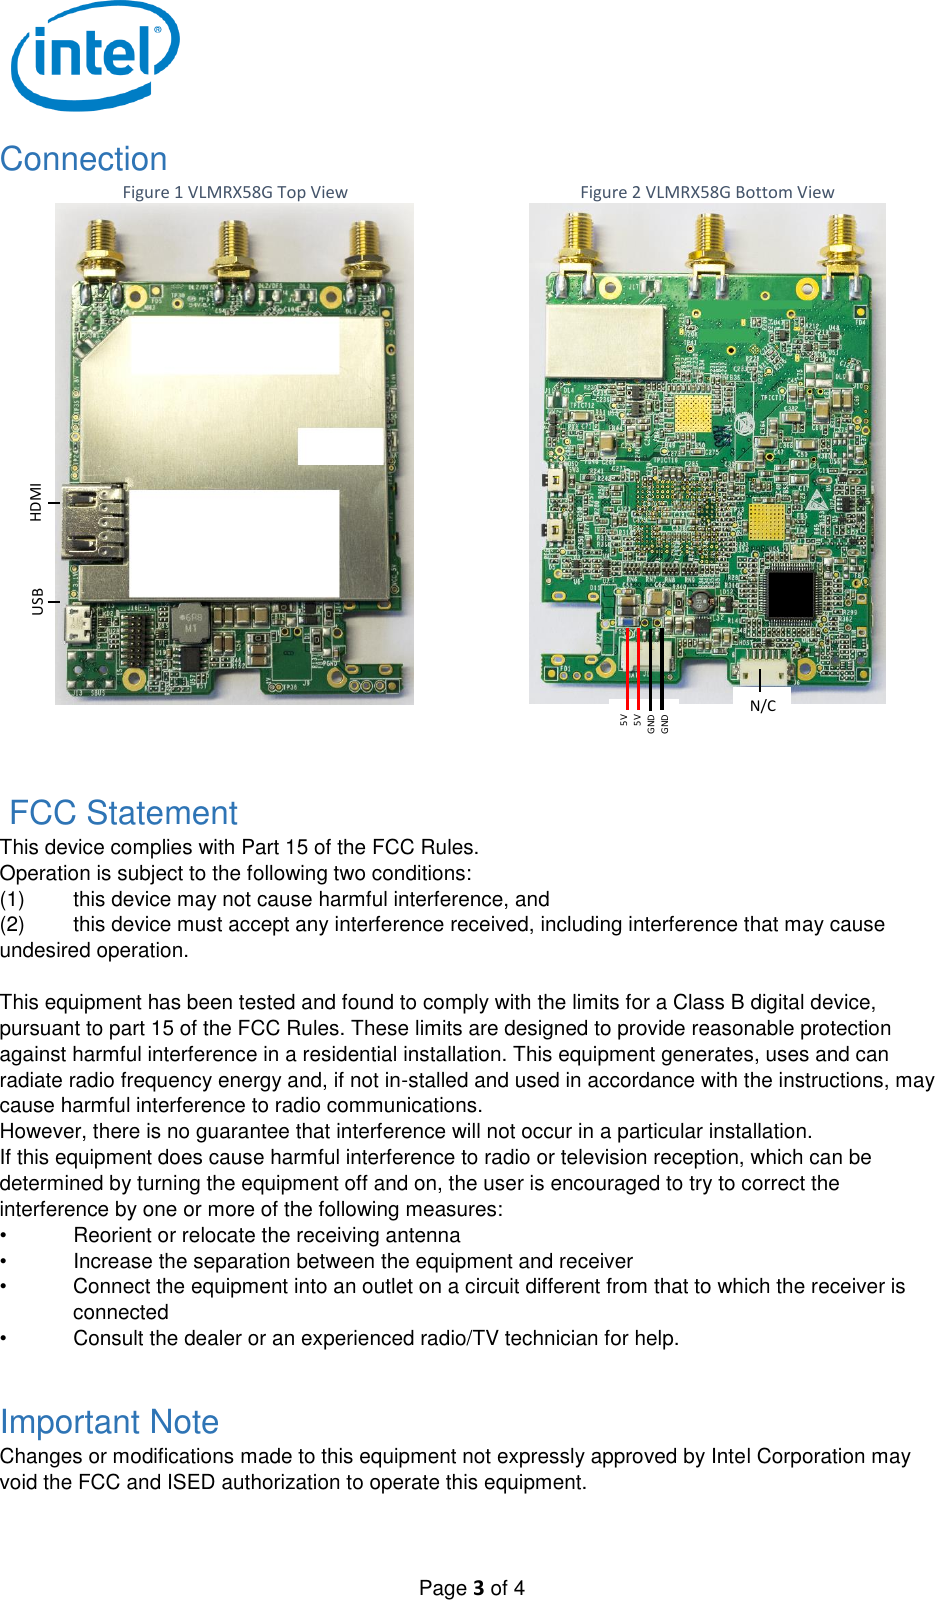   Page 3 of 4 Connection Figure 1 VLMRX58G Top View  Figure 2 VLMRX58G Bottom View  FCC Statement This device complies with Part 15 of the FCC Rules. Operation is subject to the following two conditions: (1)  this device may not cause harmful interference, and  (2)  this device must accept any interference received, including interference that may cause undesired operation.  This equipment has been tested and found to comply with the limits for a Class B digital device, pursuant to part 15 of the FCC Rules. These limits are designed to provide reasonable protection against harmful interference in a residential installation. This equipment generates, uses and can radiate radio frequency energy and, if not in-stalled and used in accordance with the instructions, may cause harmful interference to radio communications. However, there is no guarantee that interference will not occur in a particular installation. If this equipment does cause harmful interference to radio or television reception, which can be determined by turning the equipment off and on, the user is encouraged to try to correct the interference by one or more of the following measures: •  Reorient or relocate the receiving antenna •  Increase the separation between the equipment and receiver •  Connect the equipment into an outlet on a circuit different from that to which the receiver is connected •  Consult the dealer or an experienced radio/TV technician for help.  Important Note Changes or modifications made to this equipment not expressly approved by Intel Corporation may void the FCC and ISED authorization to operate this equipment.  5V 5V GND GND HDMI N/C USB 